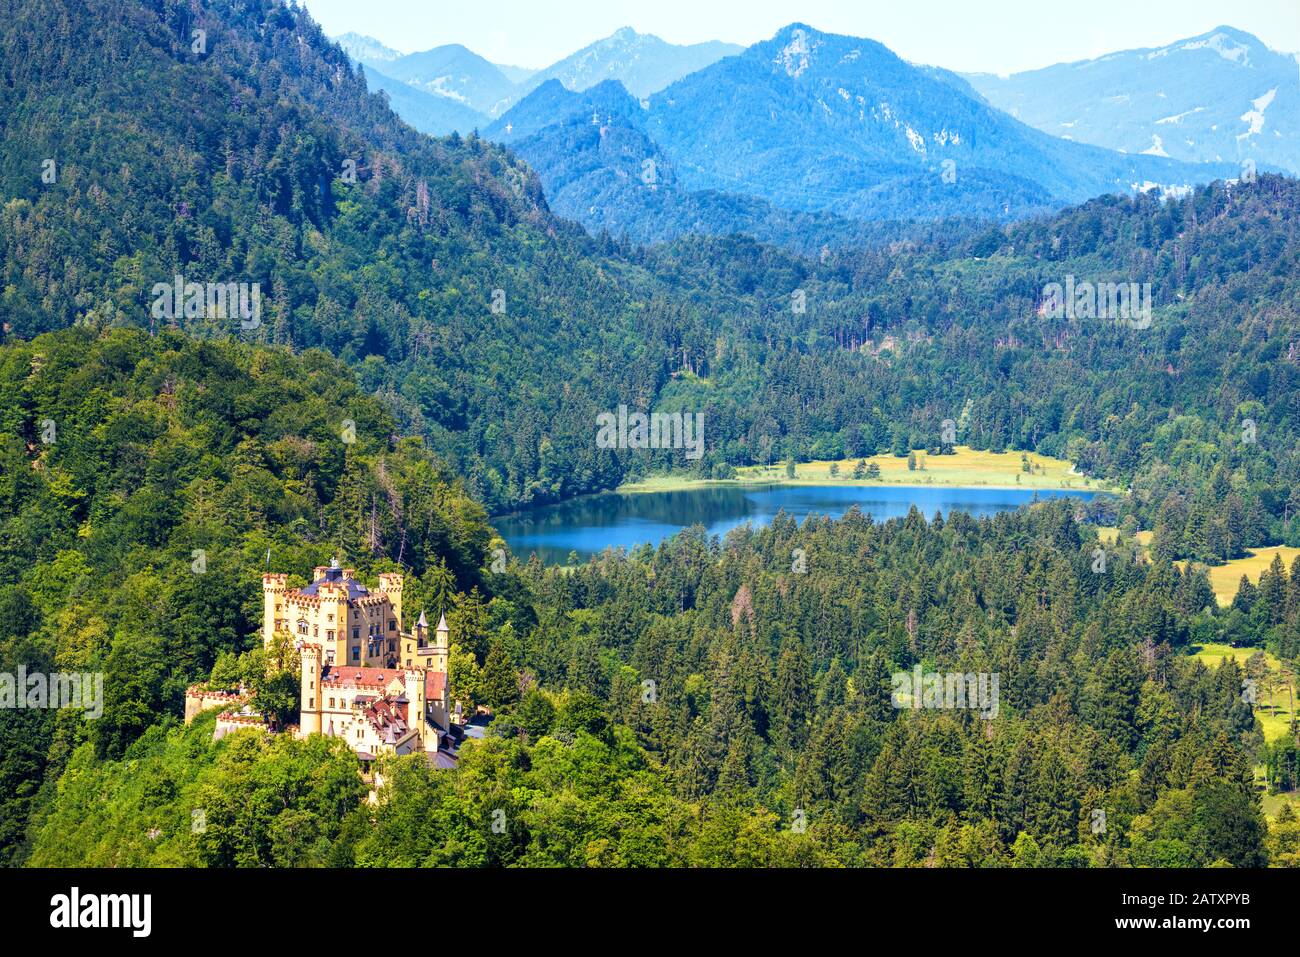 Hohenschwangau Castle in Alps, Bavaria, Germany. Aerial scenic view of beautiful castle with Schwansee lake. Alpine mountain landscape in summer. Pano Stock Photo